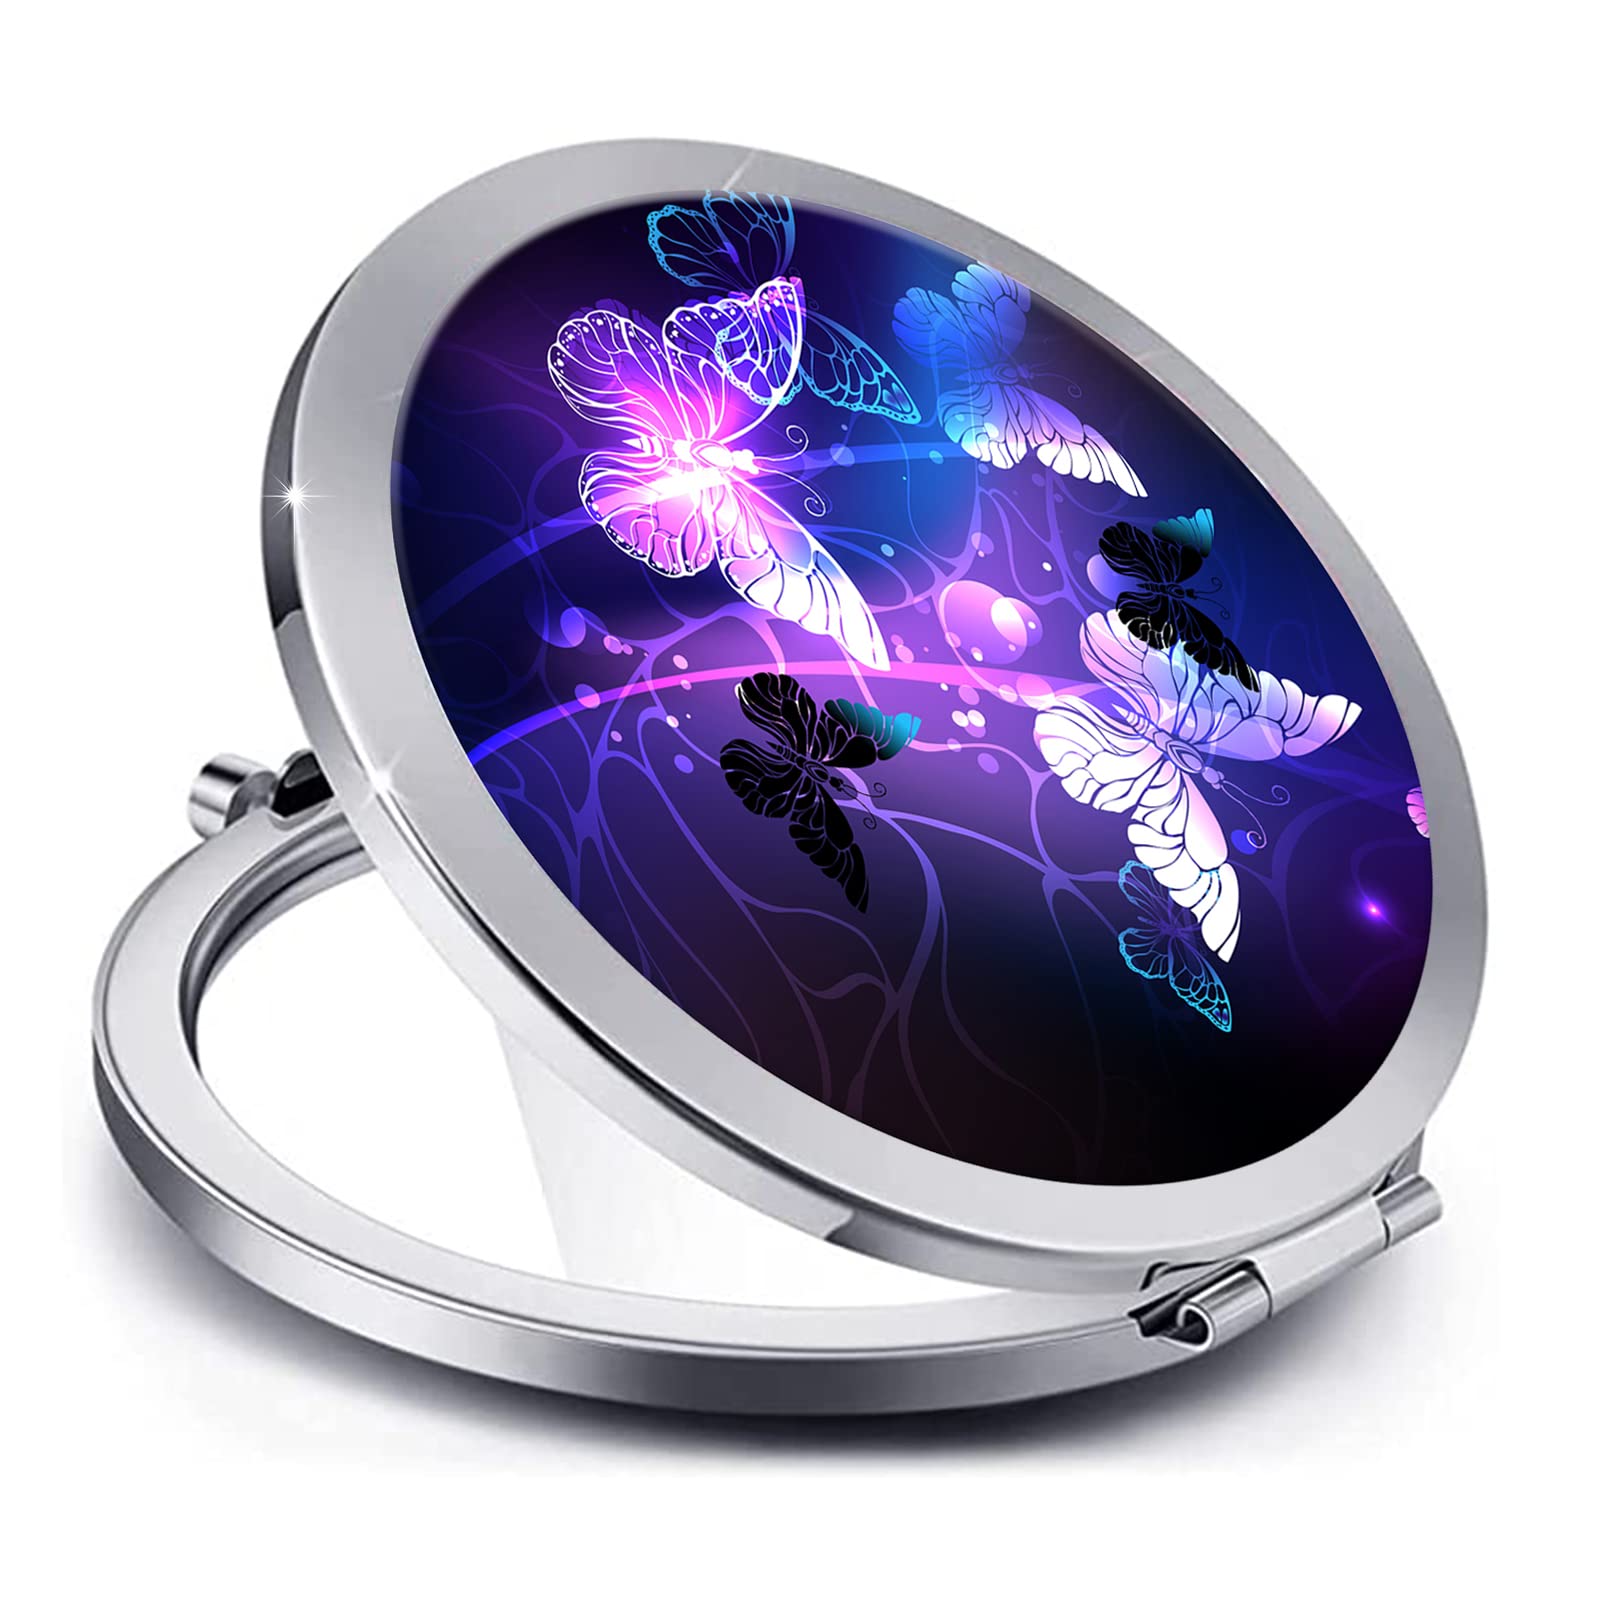 magnifying makeup mirror small mirror for purse Travel Makeup Portable Small  | eBay